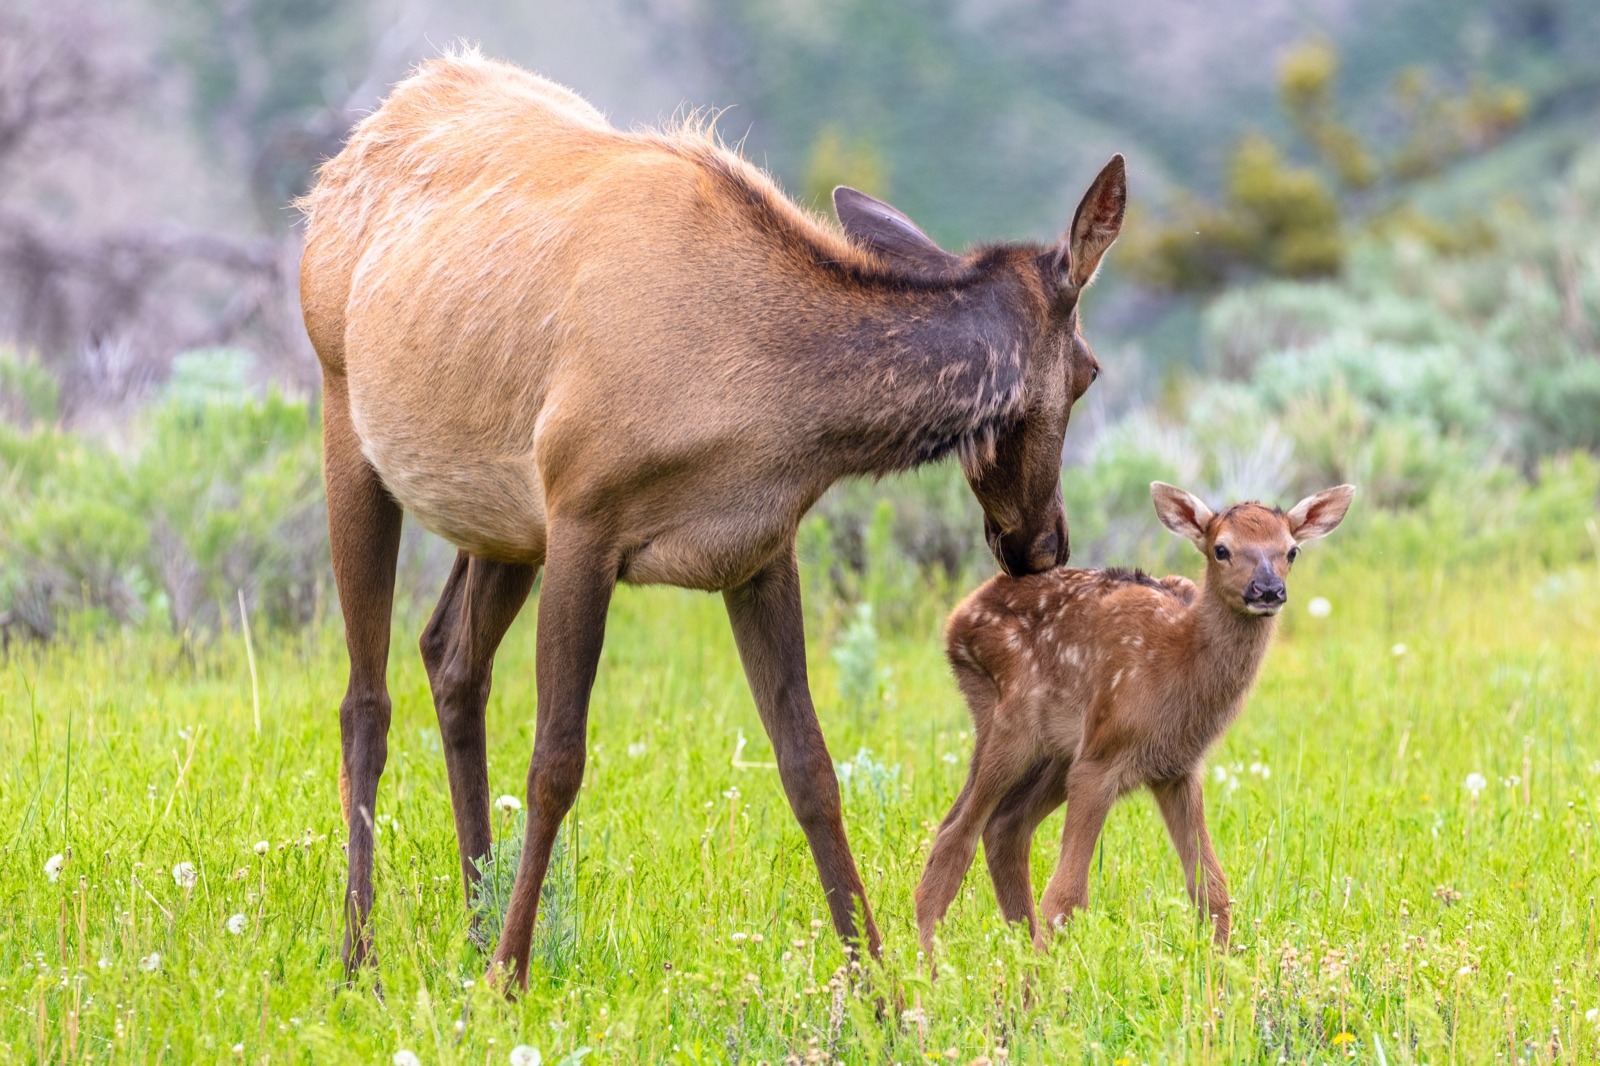 A mother elk and her calf, among thousands of adult wapiti that migrate into Yellowstone National Park from every direction in late spring and then give birth to young. Elk are vulnerable to disturbance, not only form development impacting habitat but studies show how recreation pressure on trails can displace elk from places where they want to be. That's why Wilderness areas, where typically there is less of a hubbub of human activity, are important places where elk can have habitat security. Photo courtesy Jacob W. Frank/NPS 